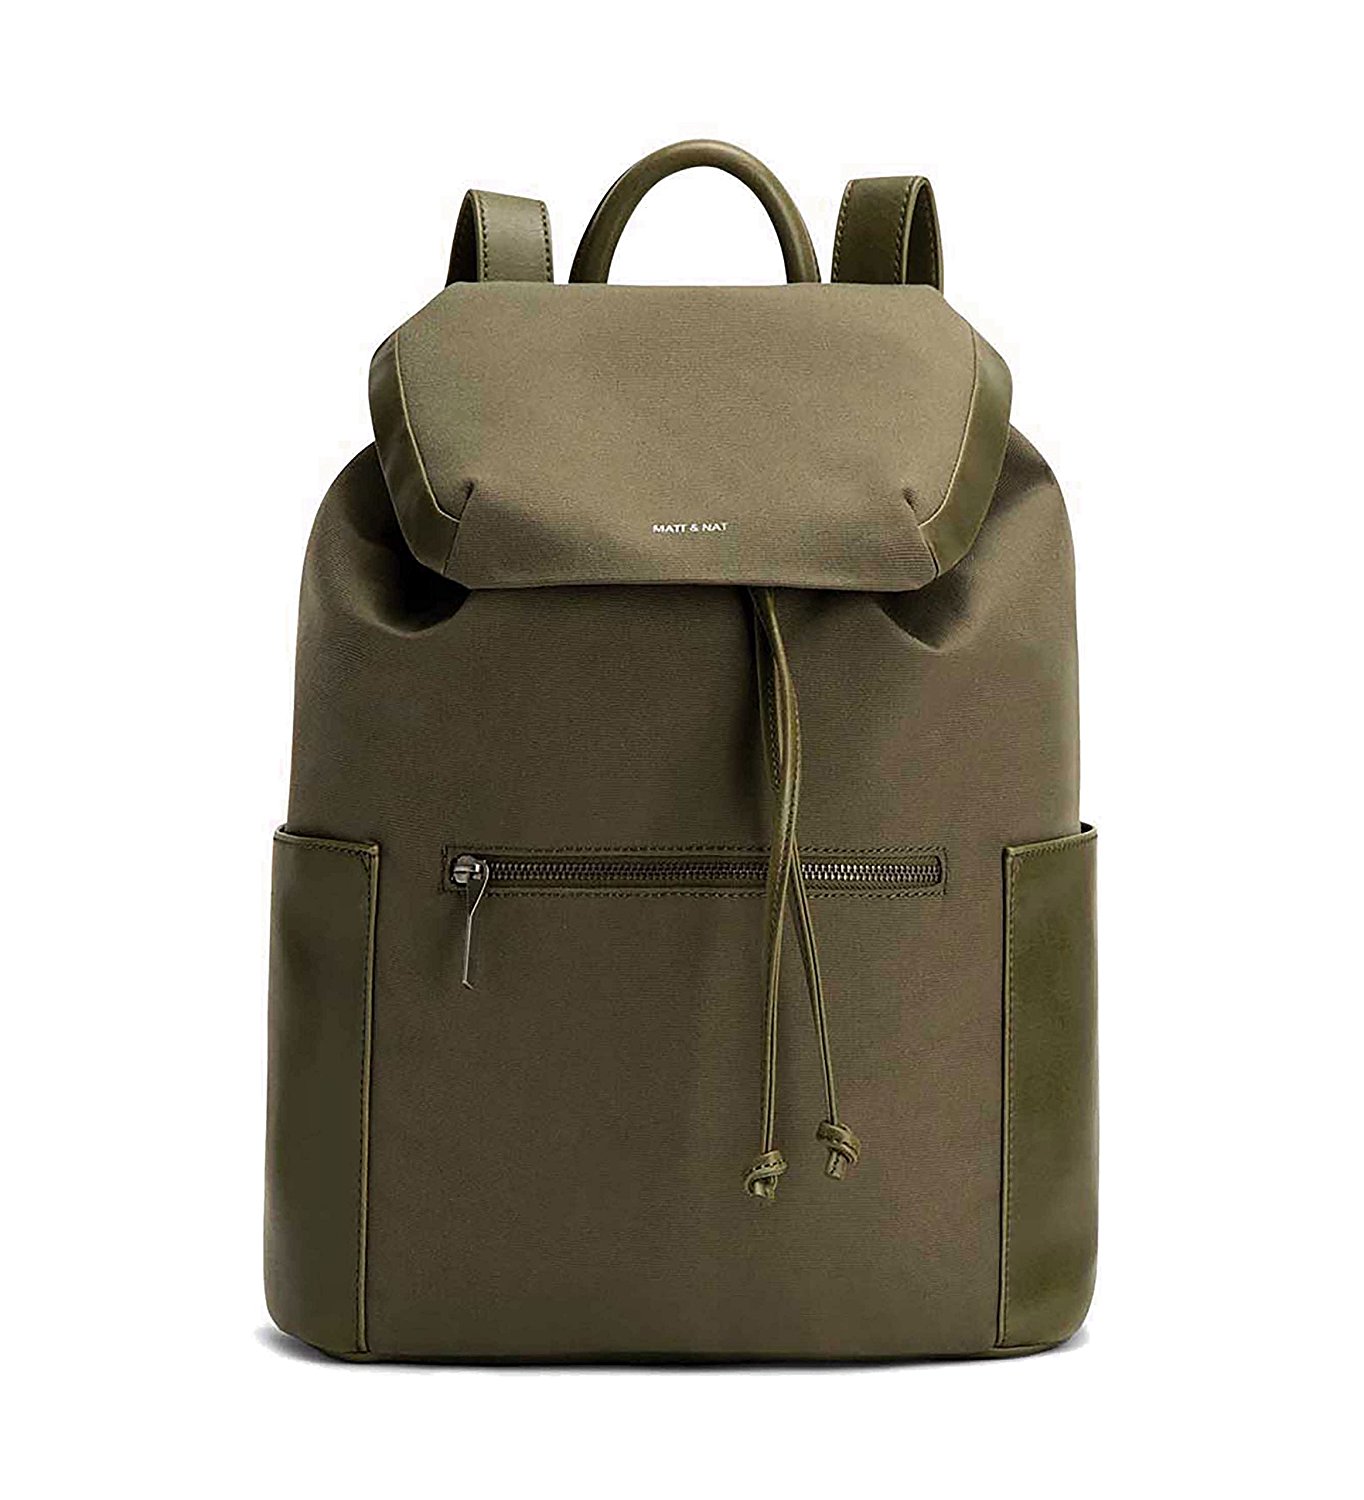 Matt & Nat Greco Canvas Backpack in Olive